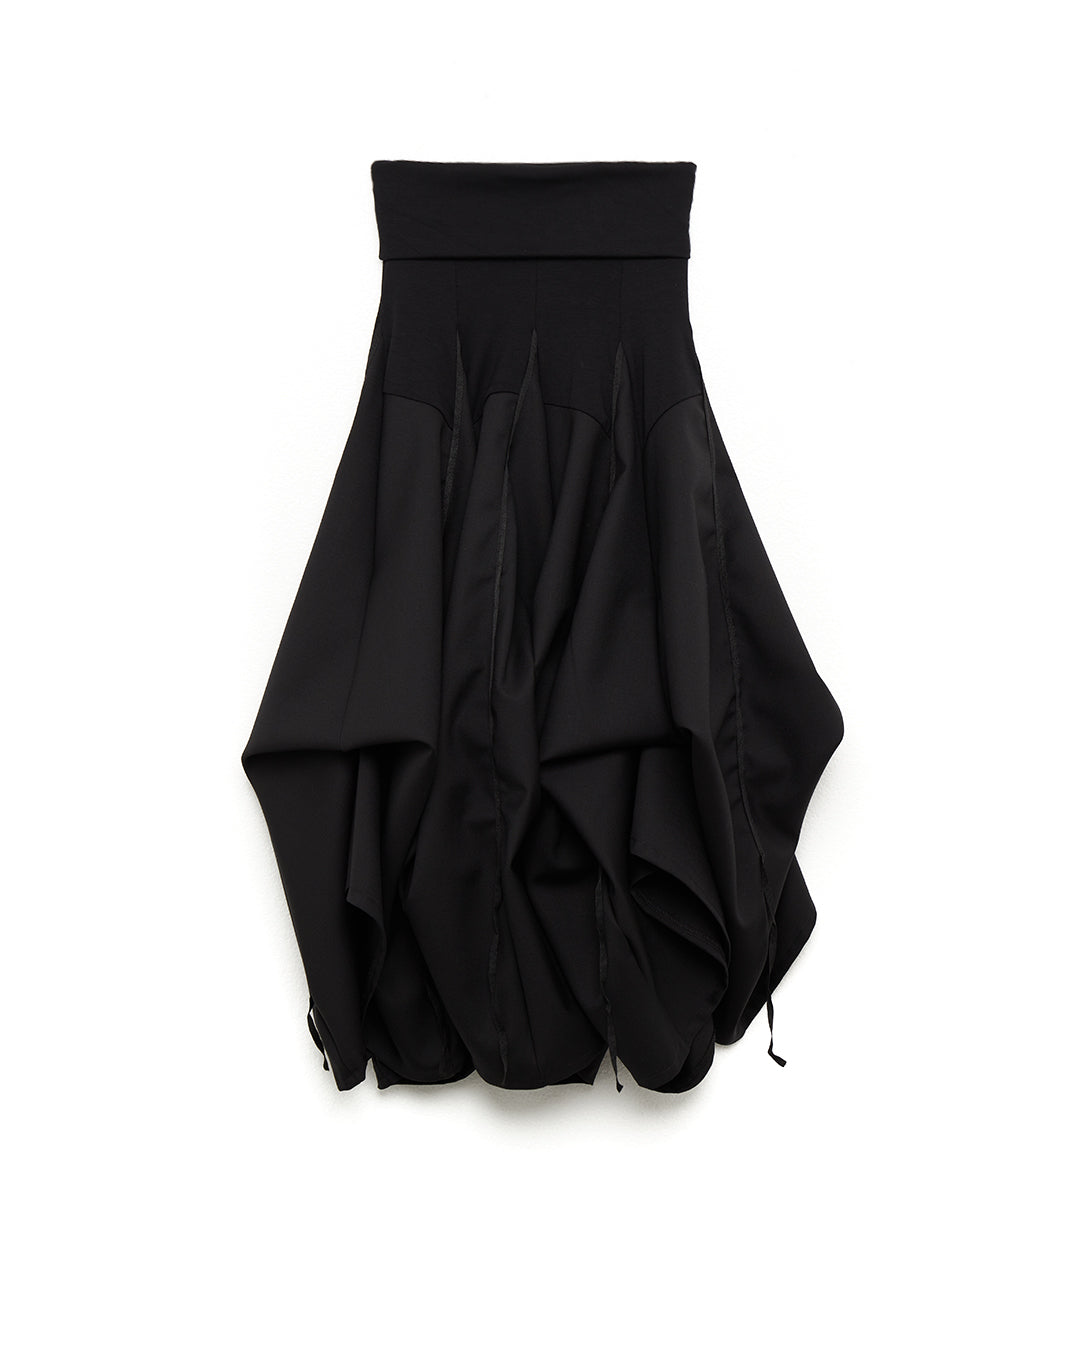 KAHE - I Want This Life And Another Skirt/Dress (Black)